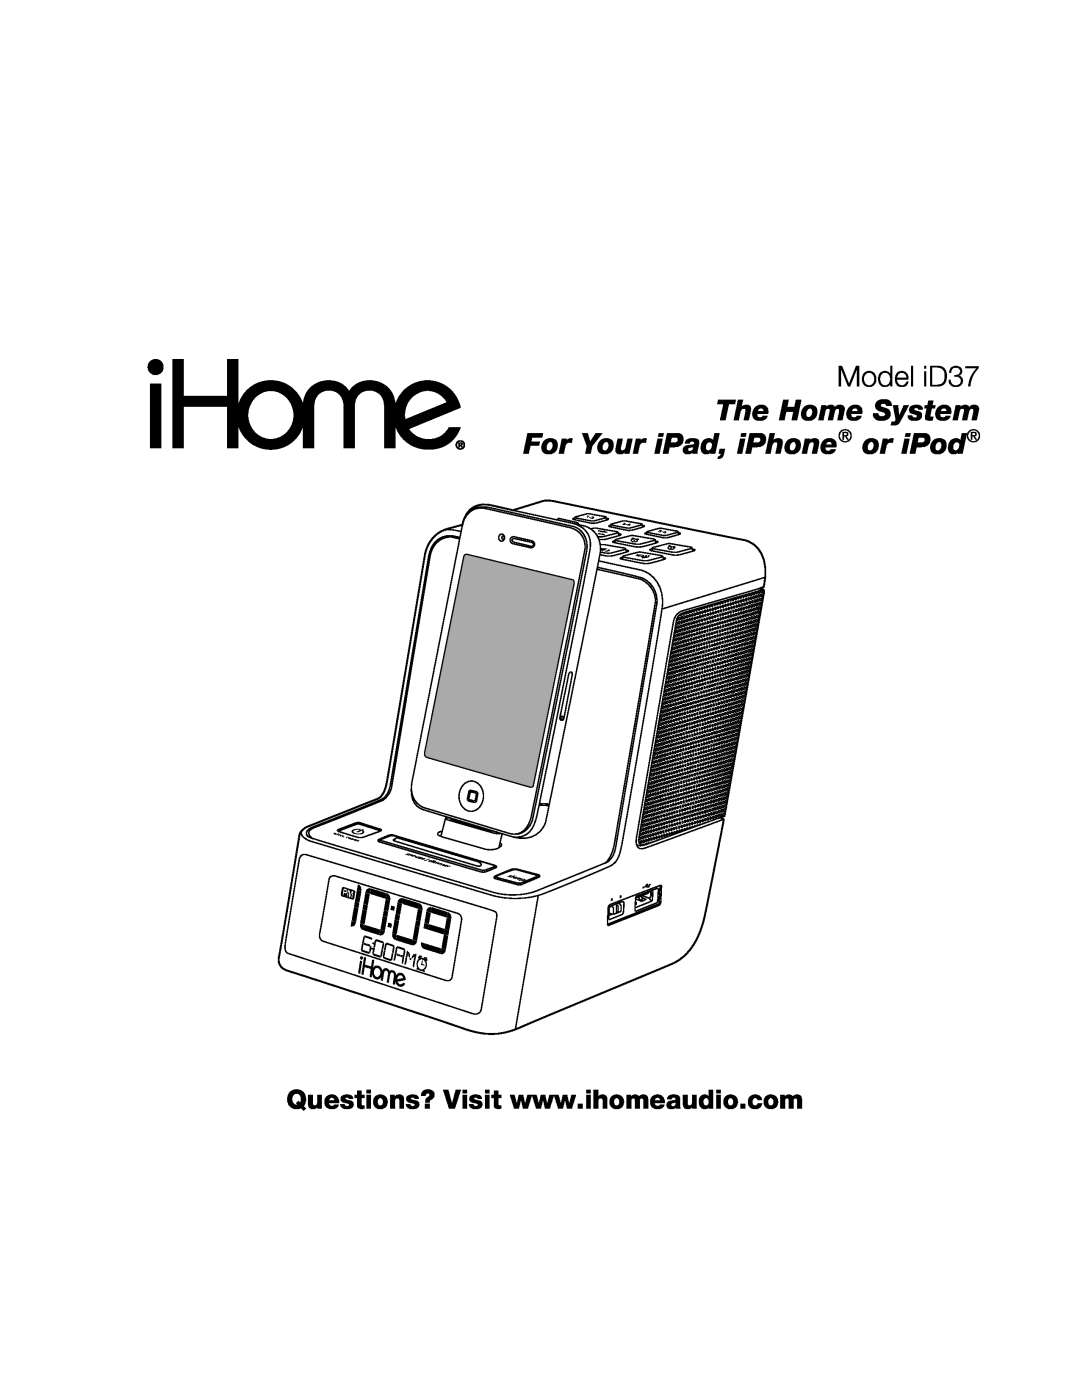 iHome ID37 manual Model iD37, The Home System For Your iPad, iPhone or iPod 